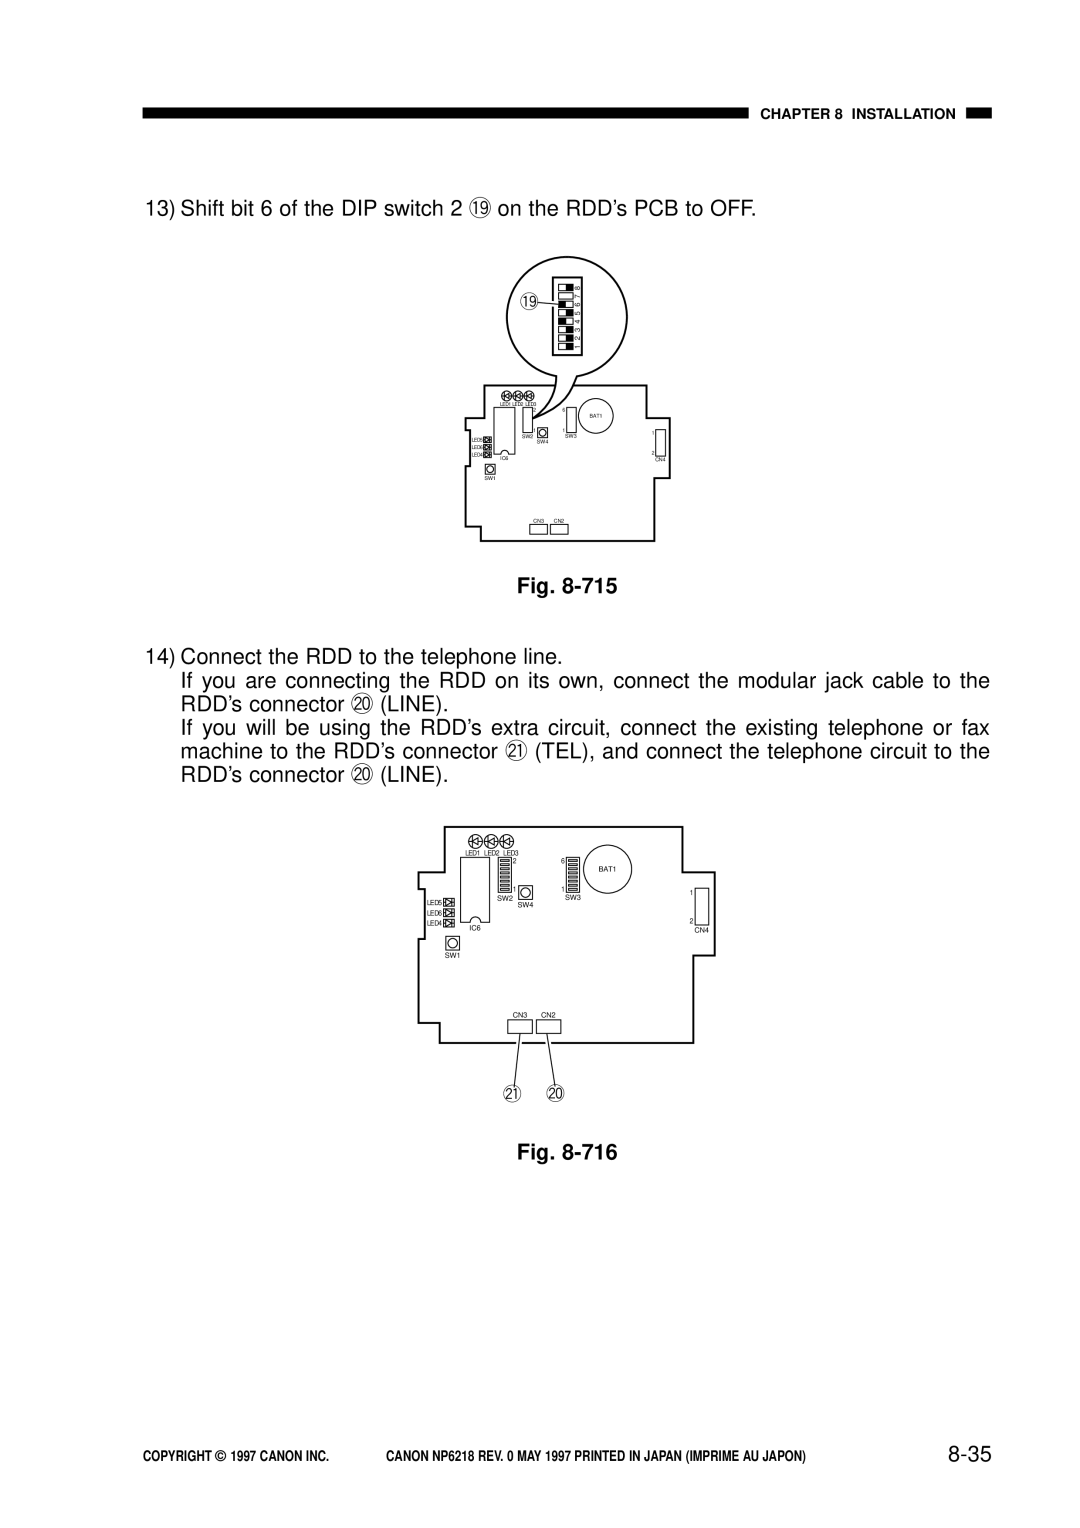 Canon FY8-13EX-000, NP6218 service manual 8-35, Shift bit 6 of the DIP switch 2 !9on the RDD’s PCB to OFF 